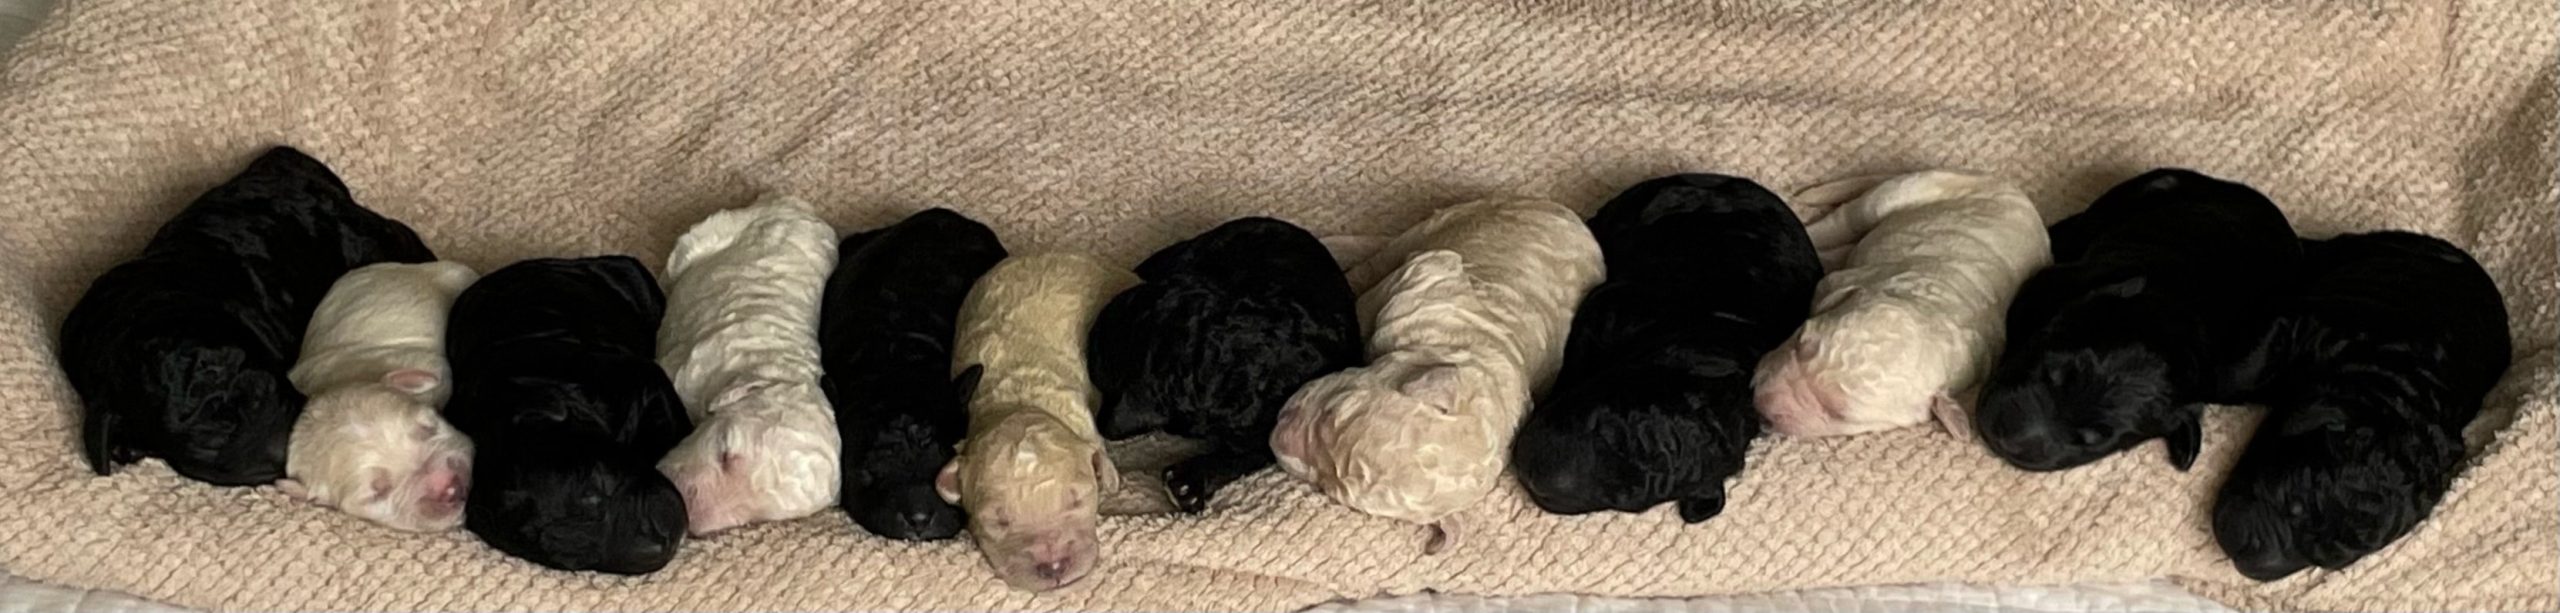 Newborn Goldendoodle puppies, in a striking black and white coat, are neatly lined up on a sofa, creating an adorable and harmonious scene